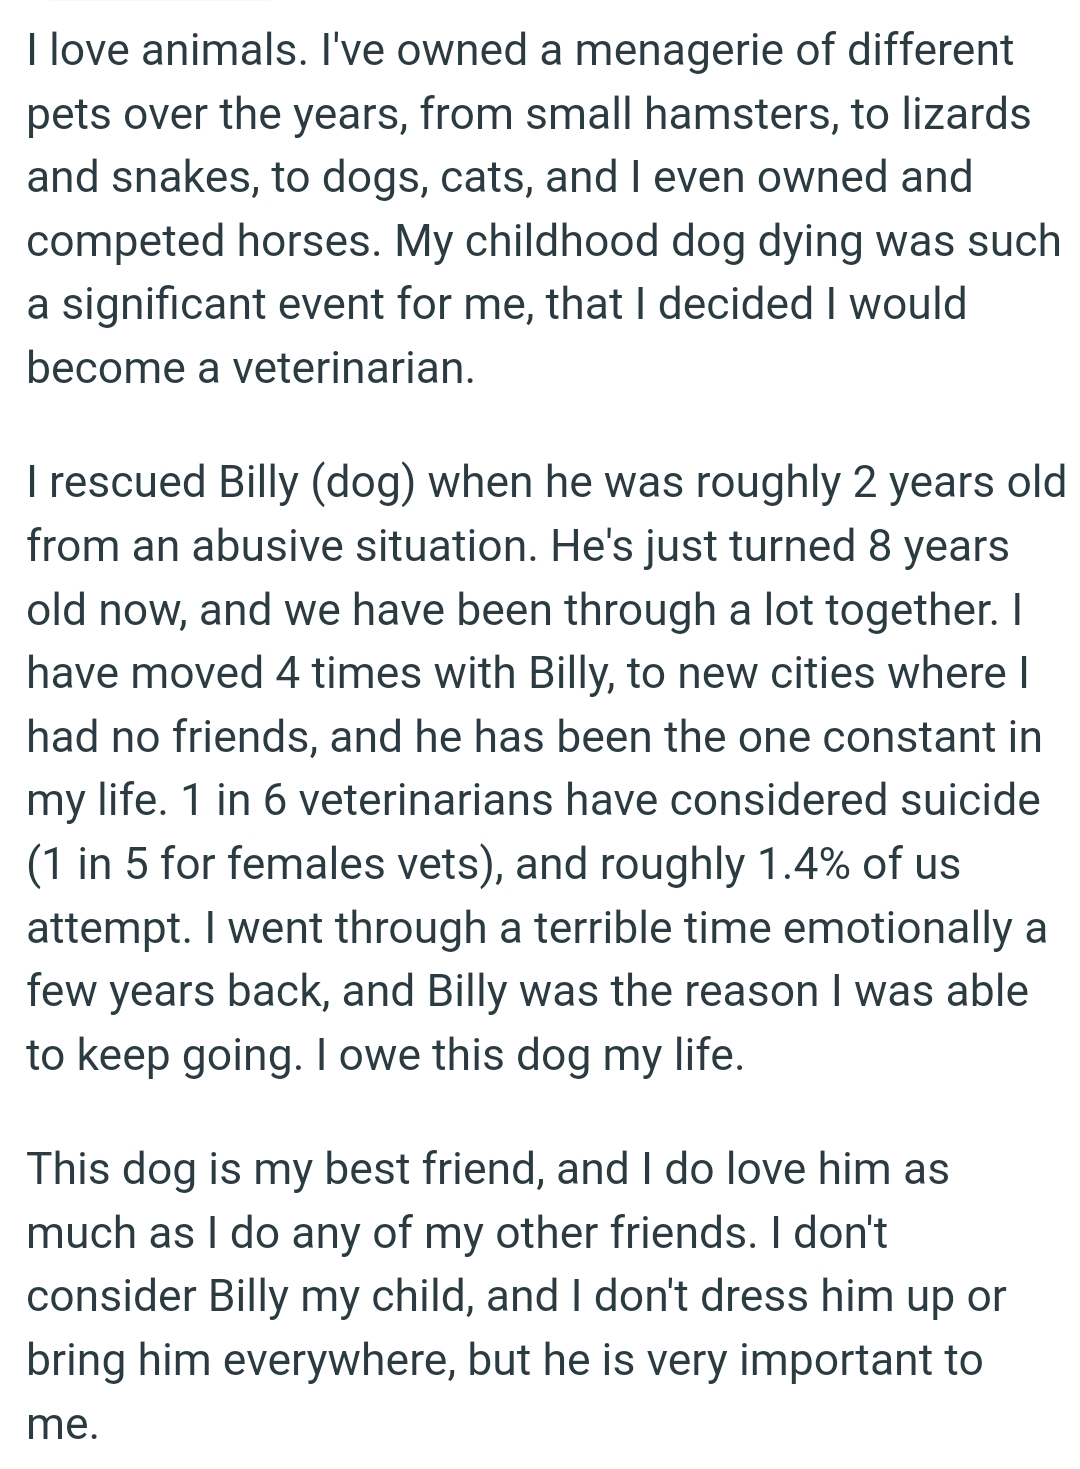 OP's childhood dog dying was such a significant event for her